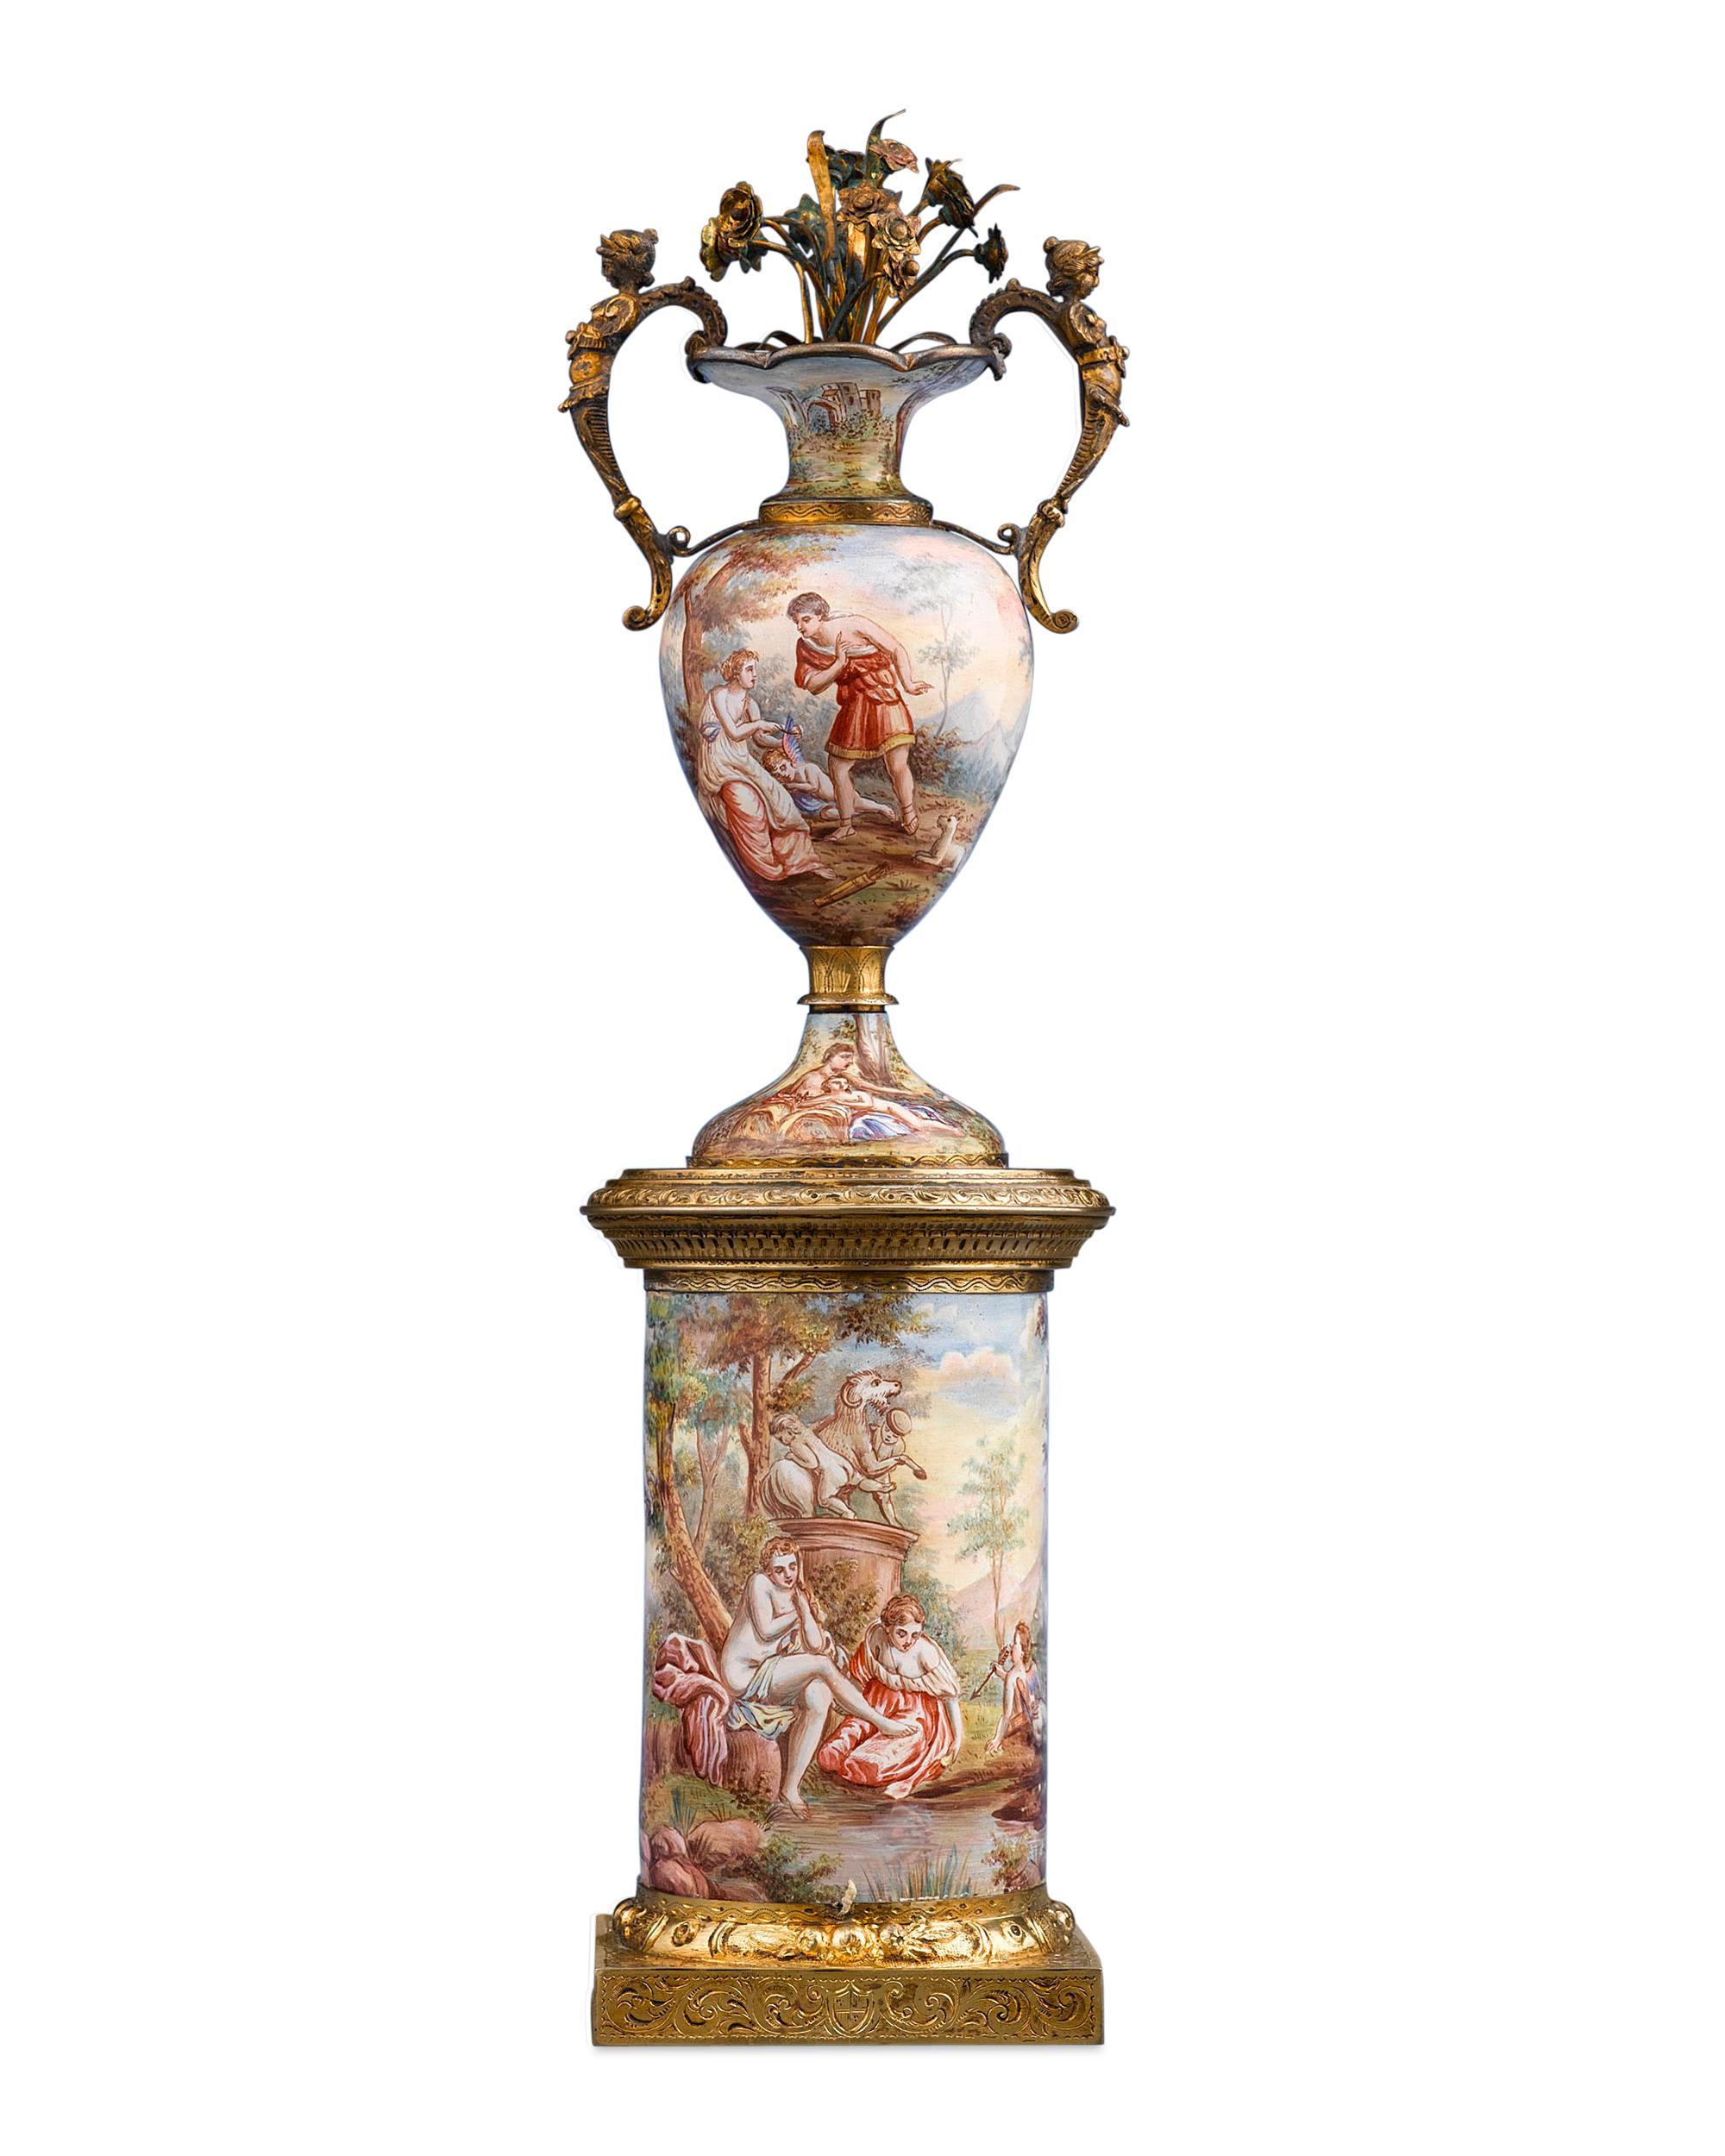 Splendid continuous hand painted scenes adorn this graceful and rare Viennese enamel vase and matching pedestal. Depicting diverse images from classical mythology, these scenes are executed with exceptional detail and artistry. The classical theme